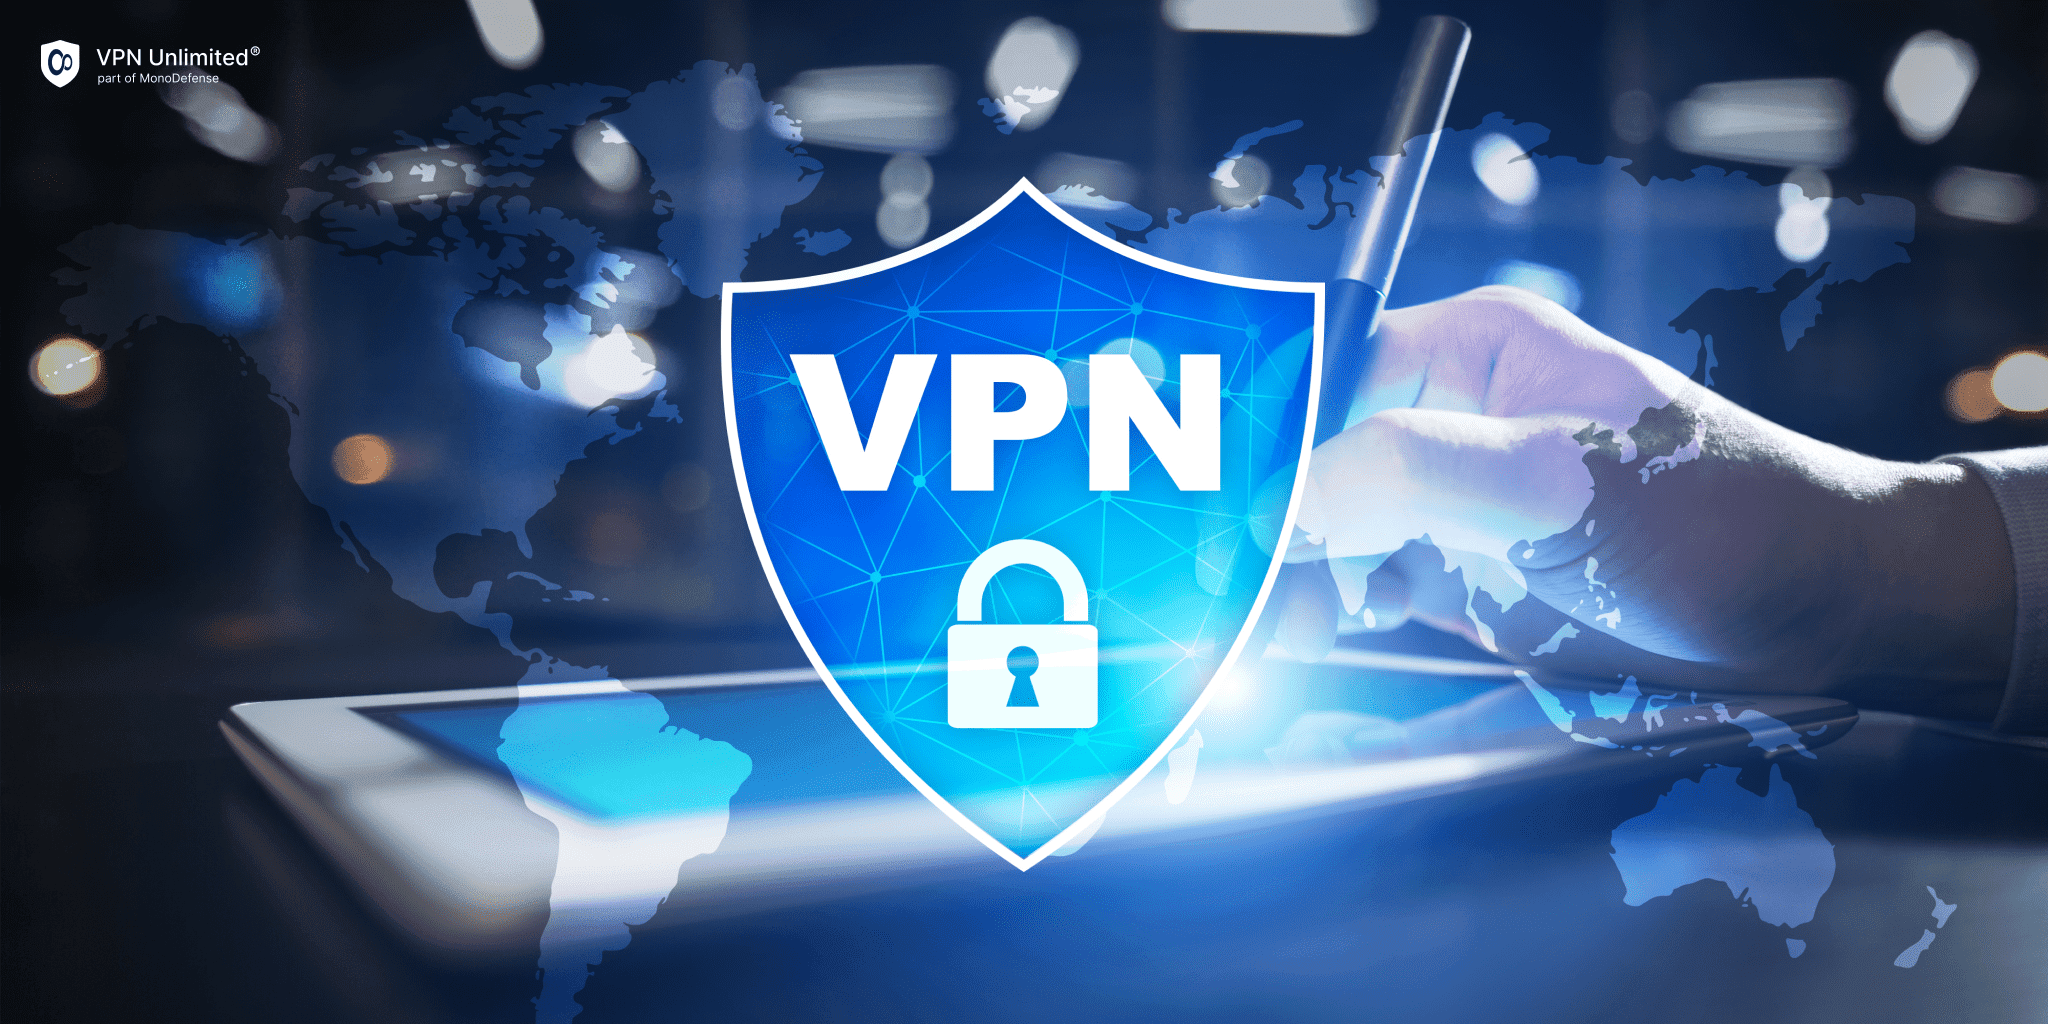 reasons to get started with our reliable VPN service